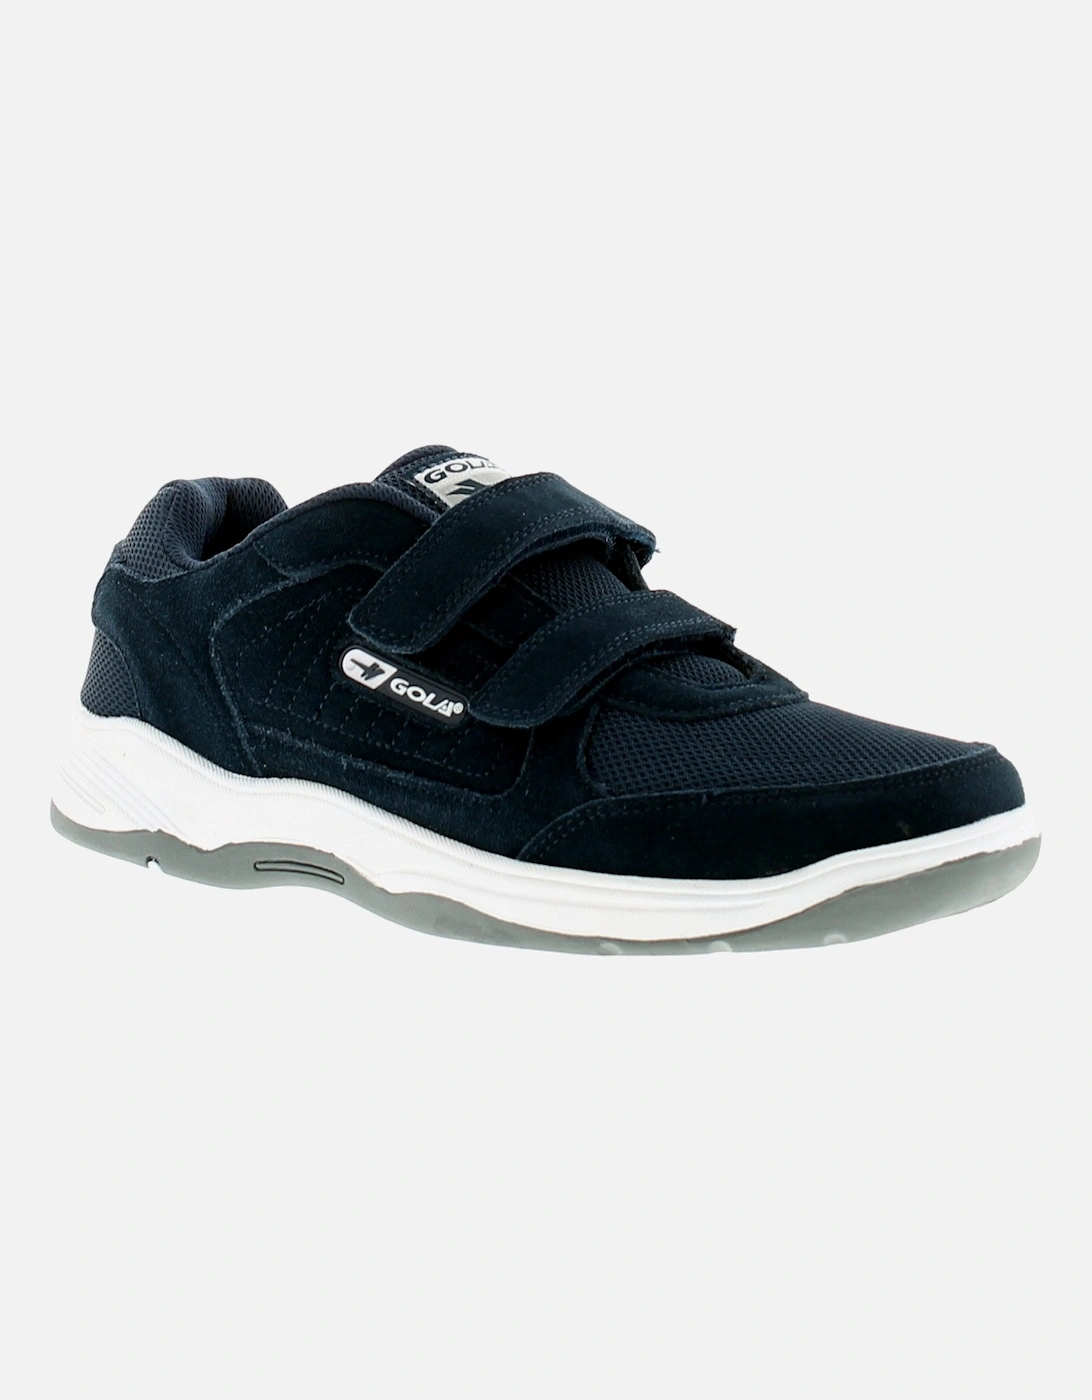 Mens Trainers Belmont Suede Wide Touch Fastening navy UK Size, 6 of 5